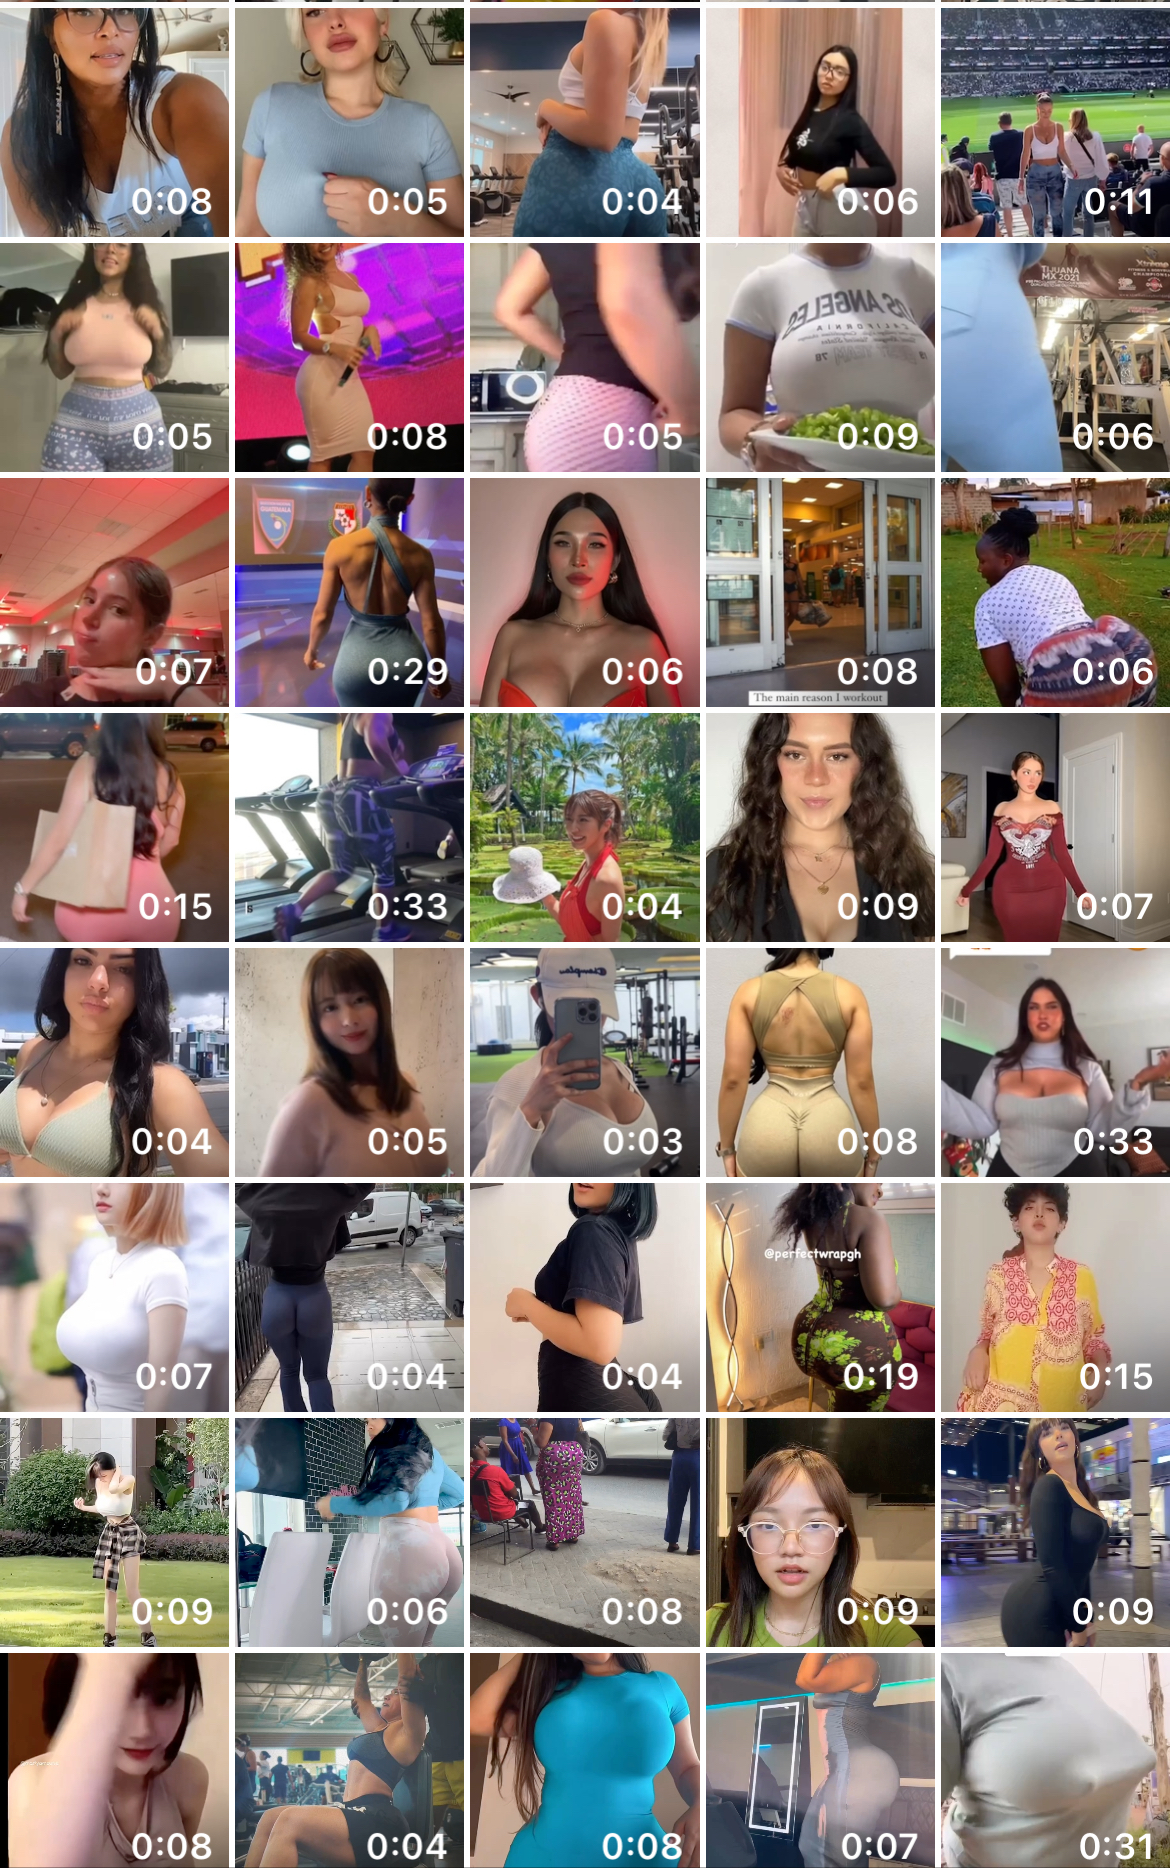 ASS AND TITTIES - 123 VIDEOS IN 1 VIDEO - 19 MINS